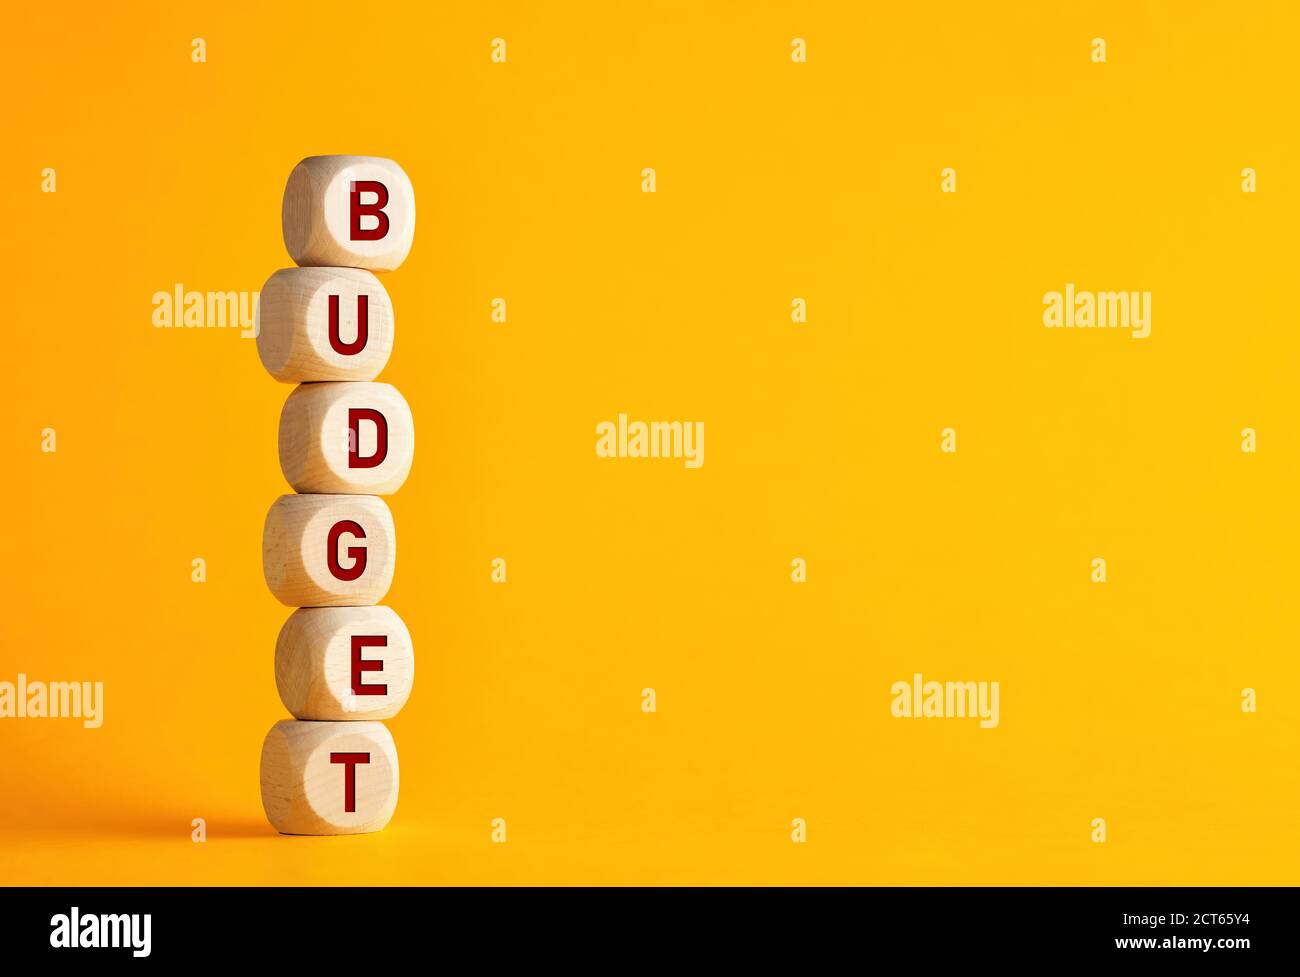 The word budget on wooden cubes against yellow background. Financial budget or investment increase or growth in business concept. Stock Photo